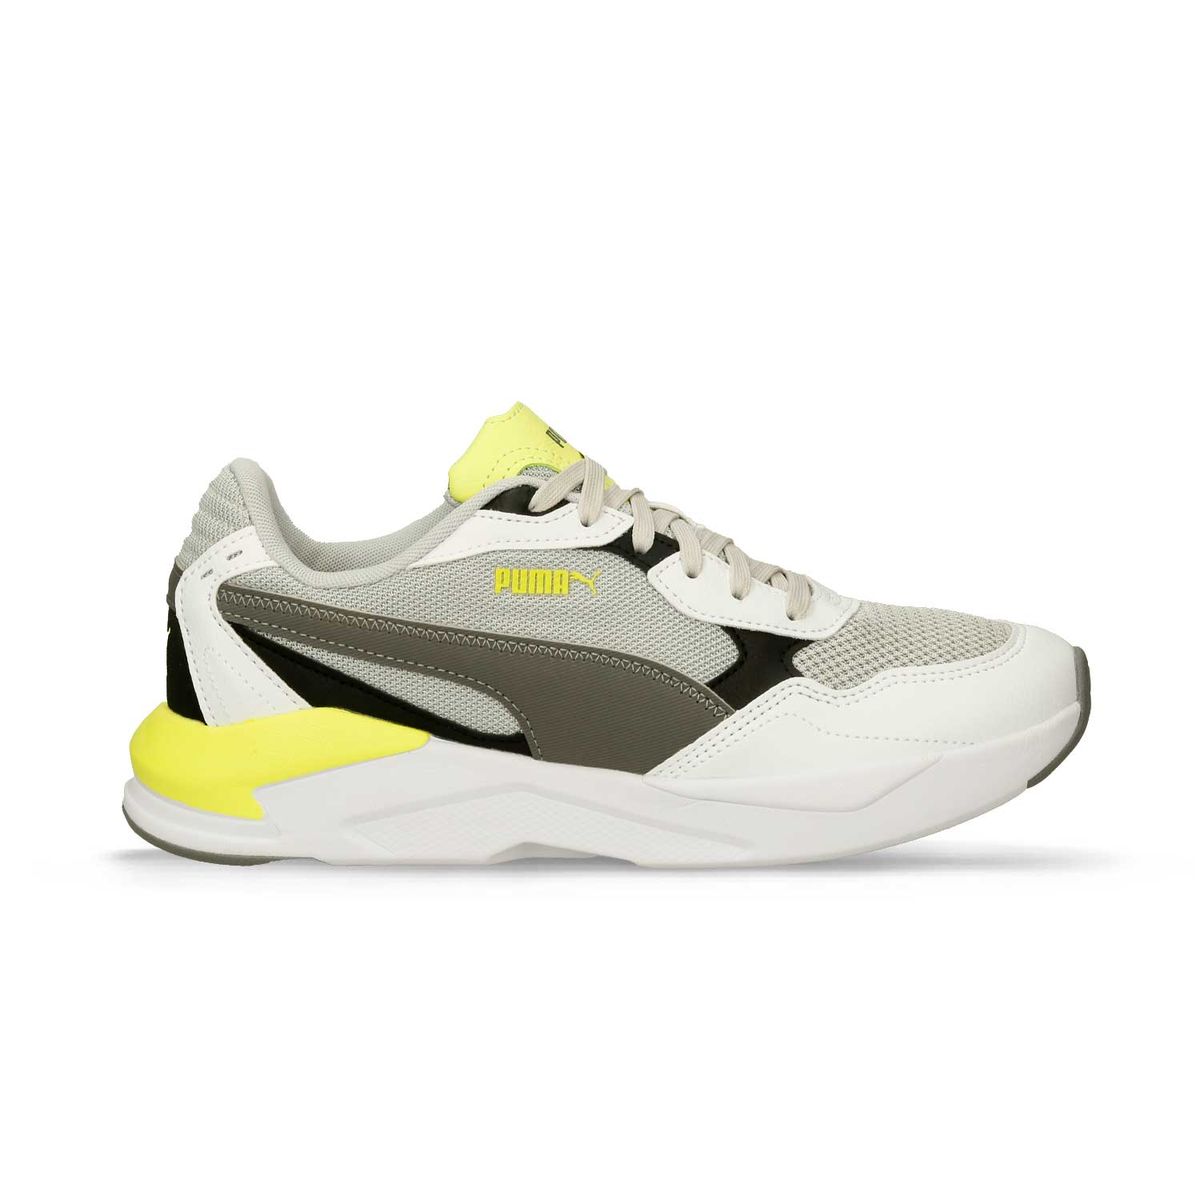 Tenis Casuales Gris-Blanco Puma X-Ray Speed Lite Hombre